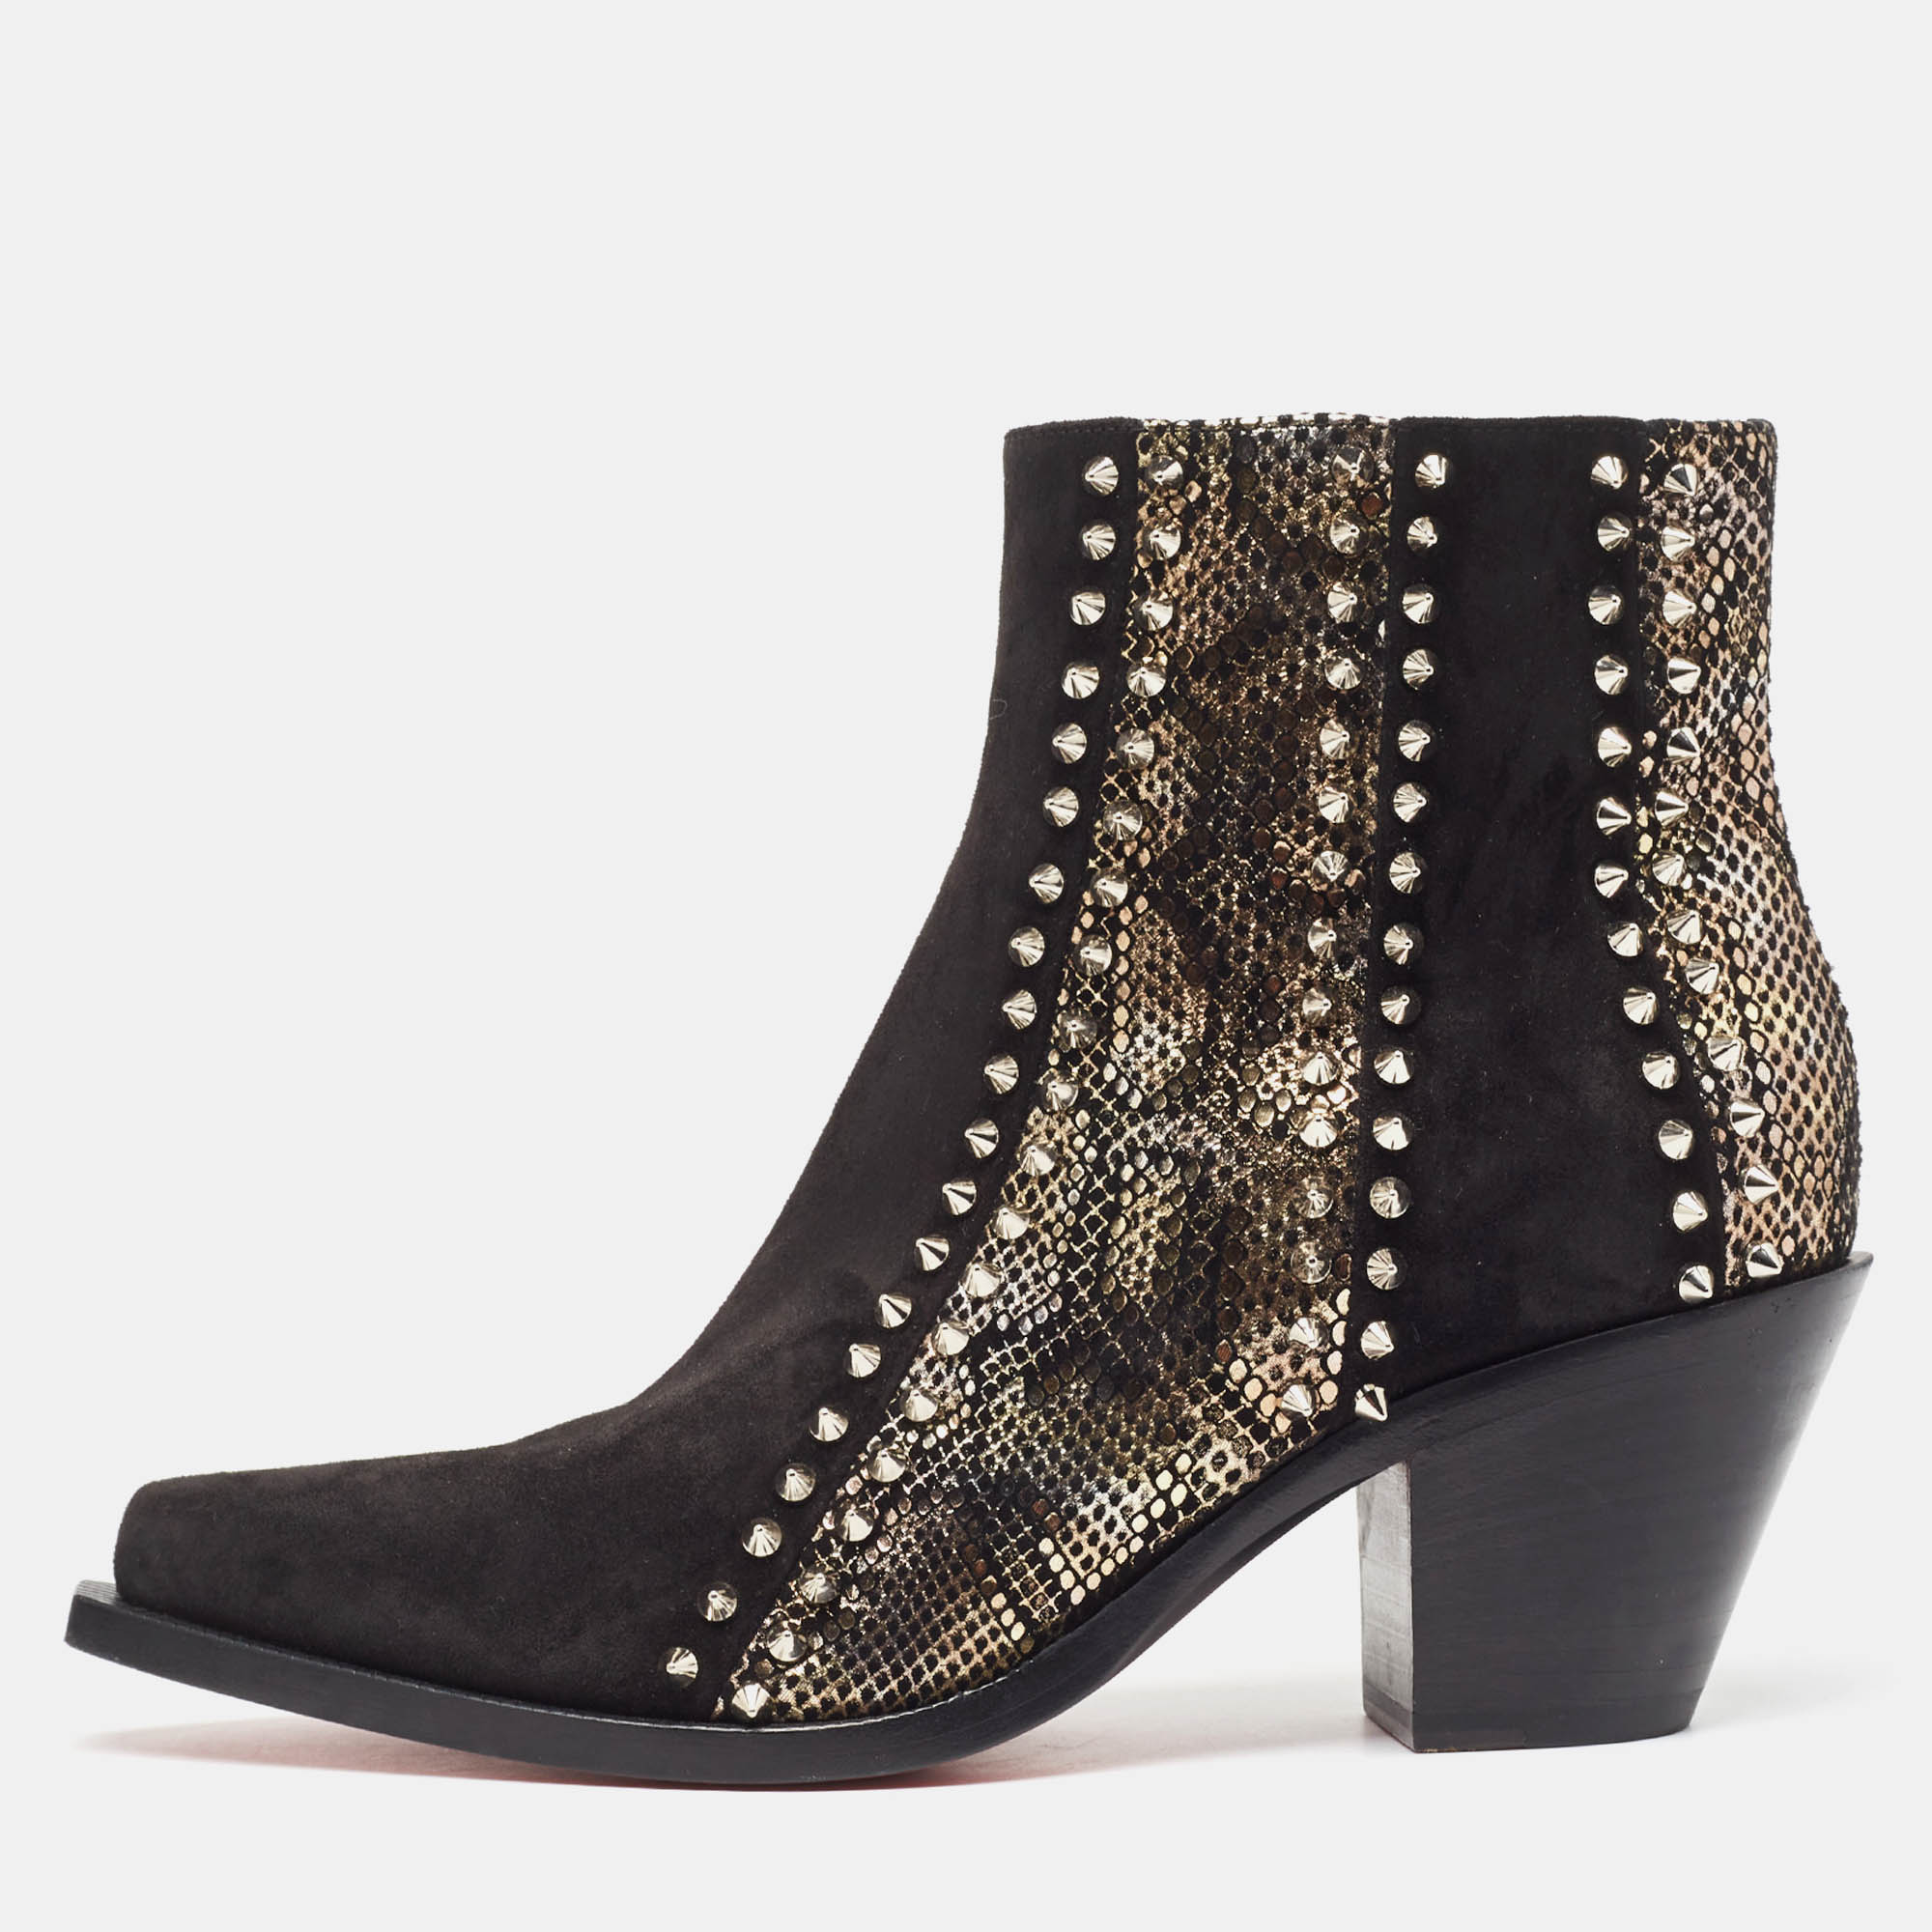 Christian louboutin black suede and snakeskin embossed ankle boots size 36